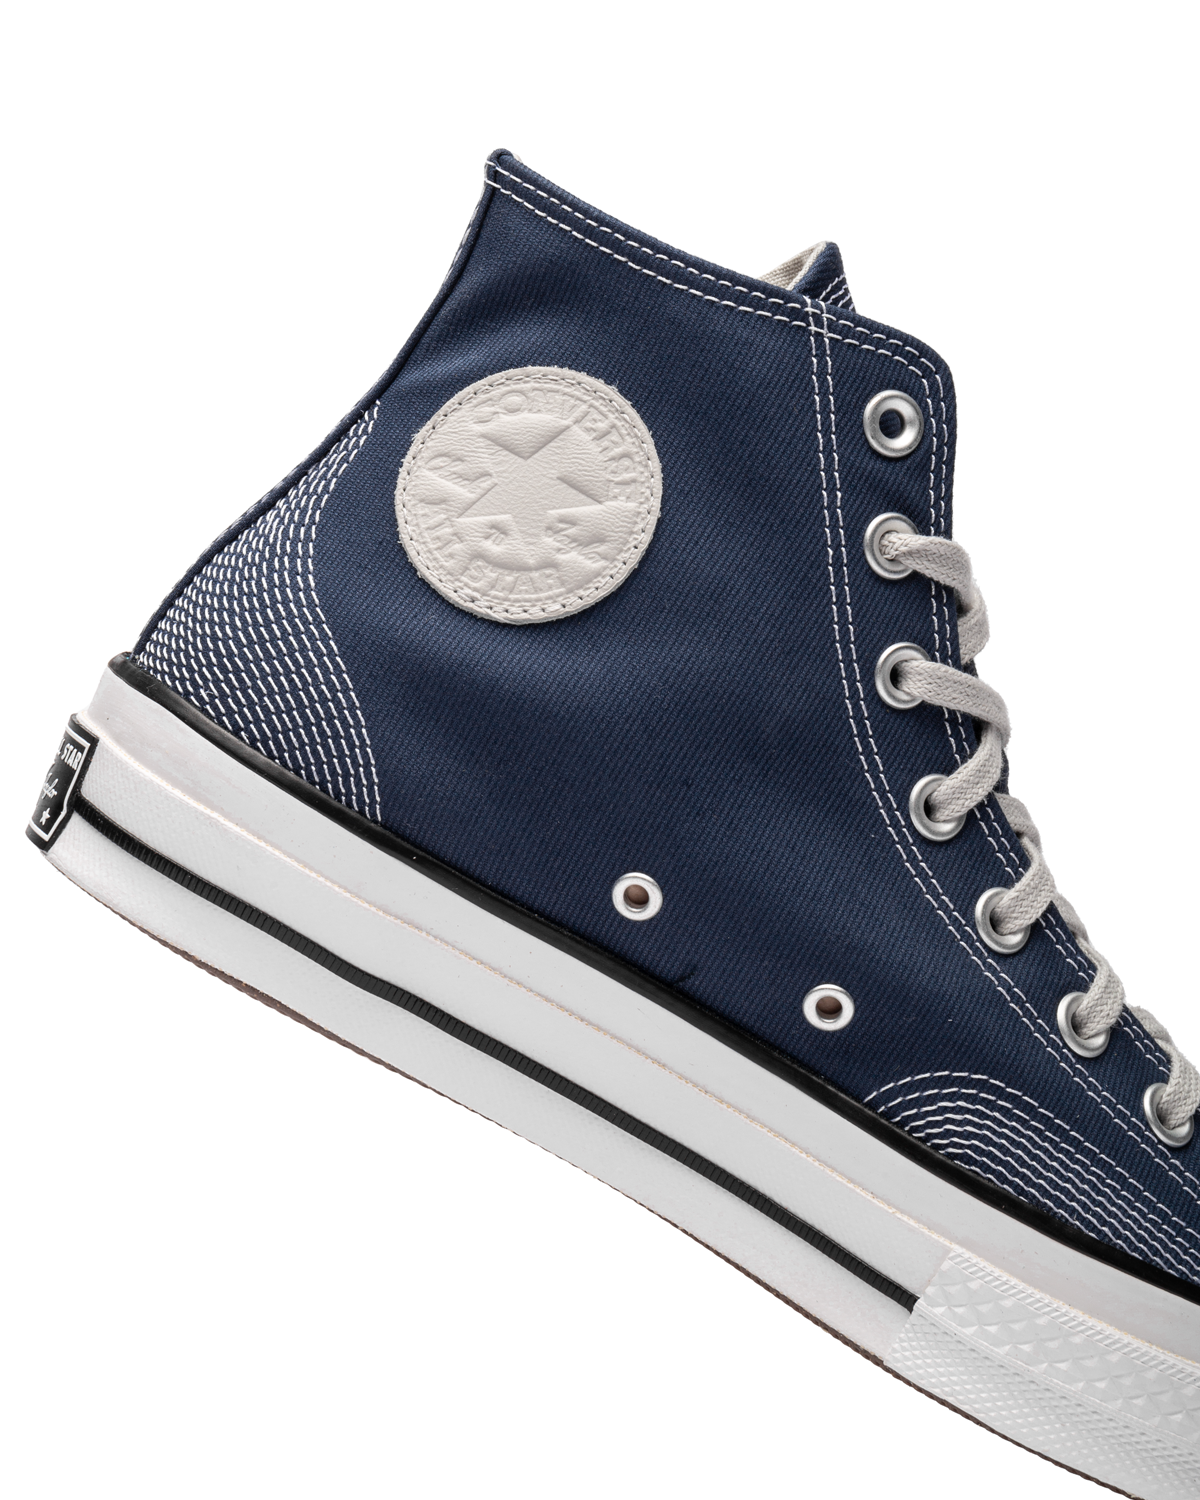 Chuck 70 Hi Navy/Fossilized/Fossilized